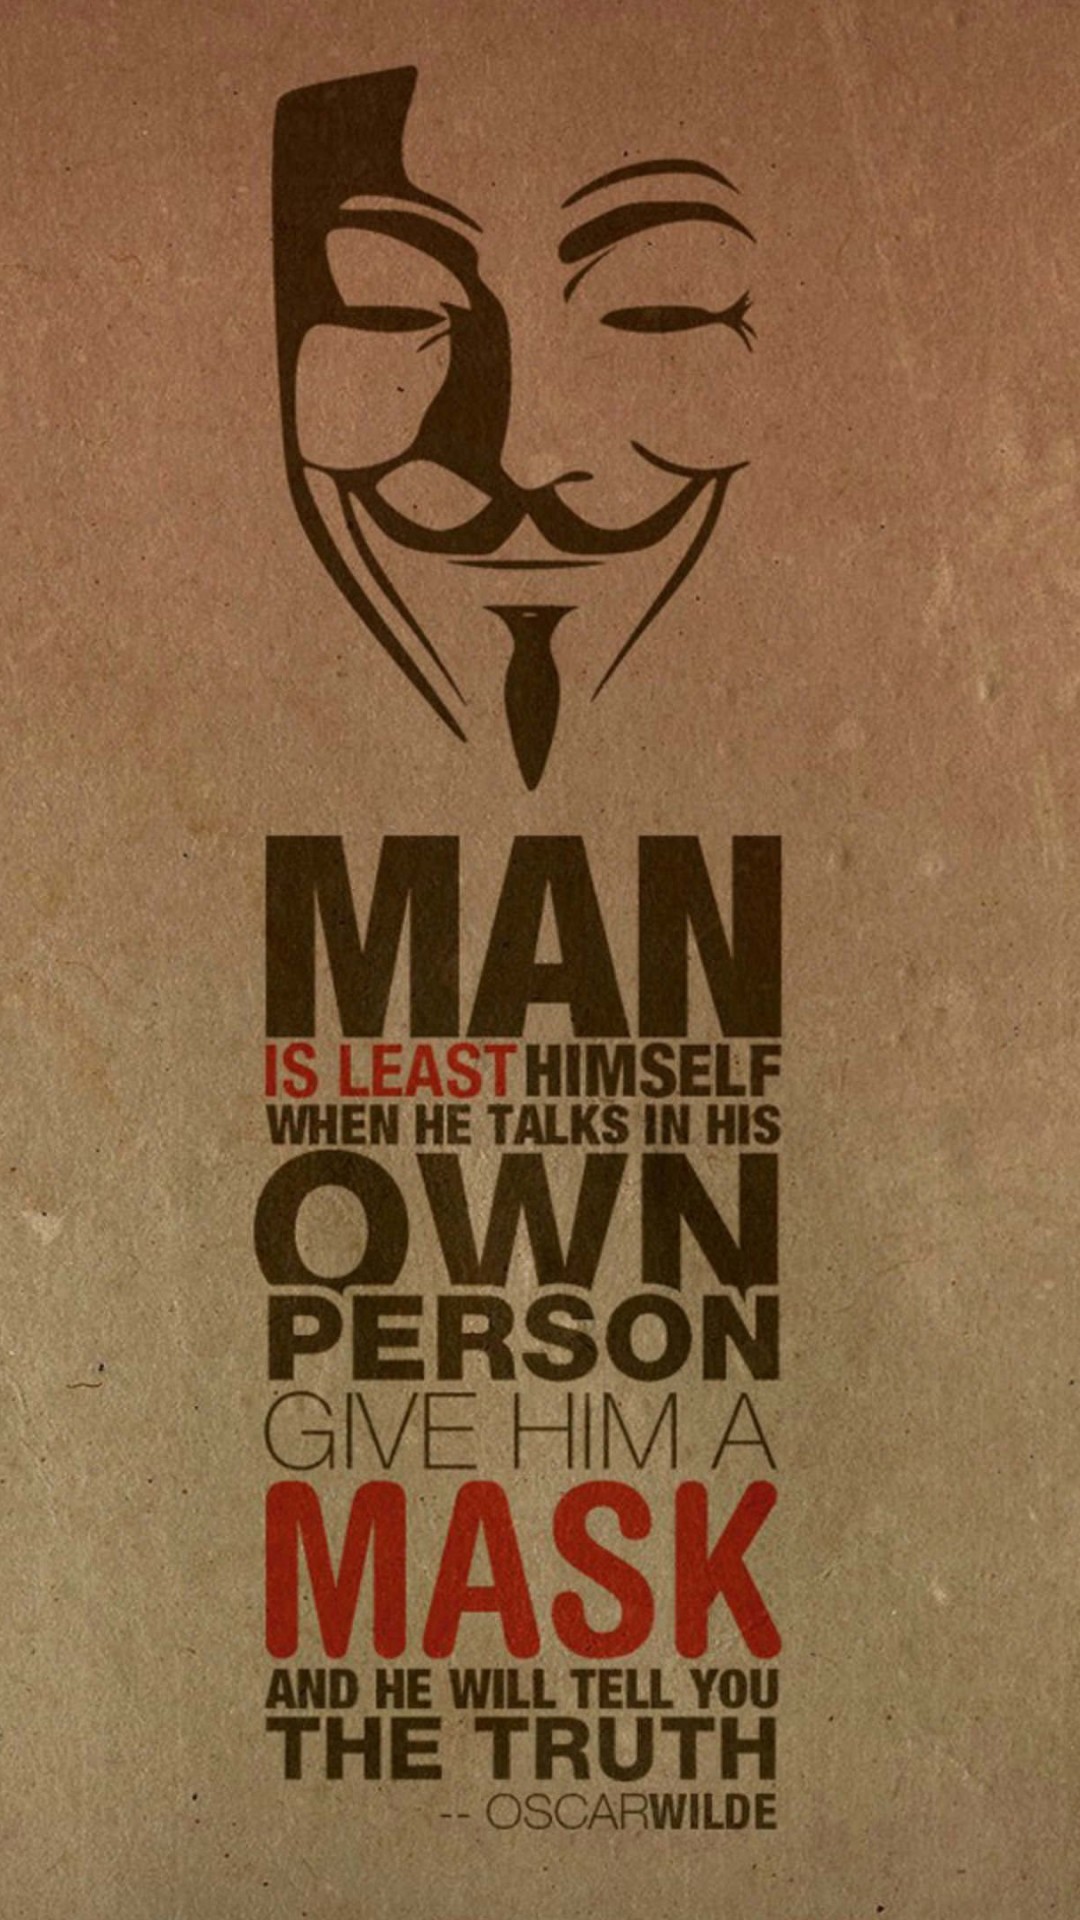 Anonymous Oscar Wilde Quote Wallpaper for LG G2